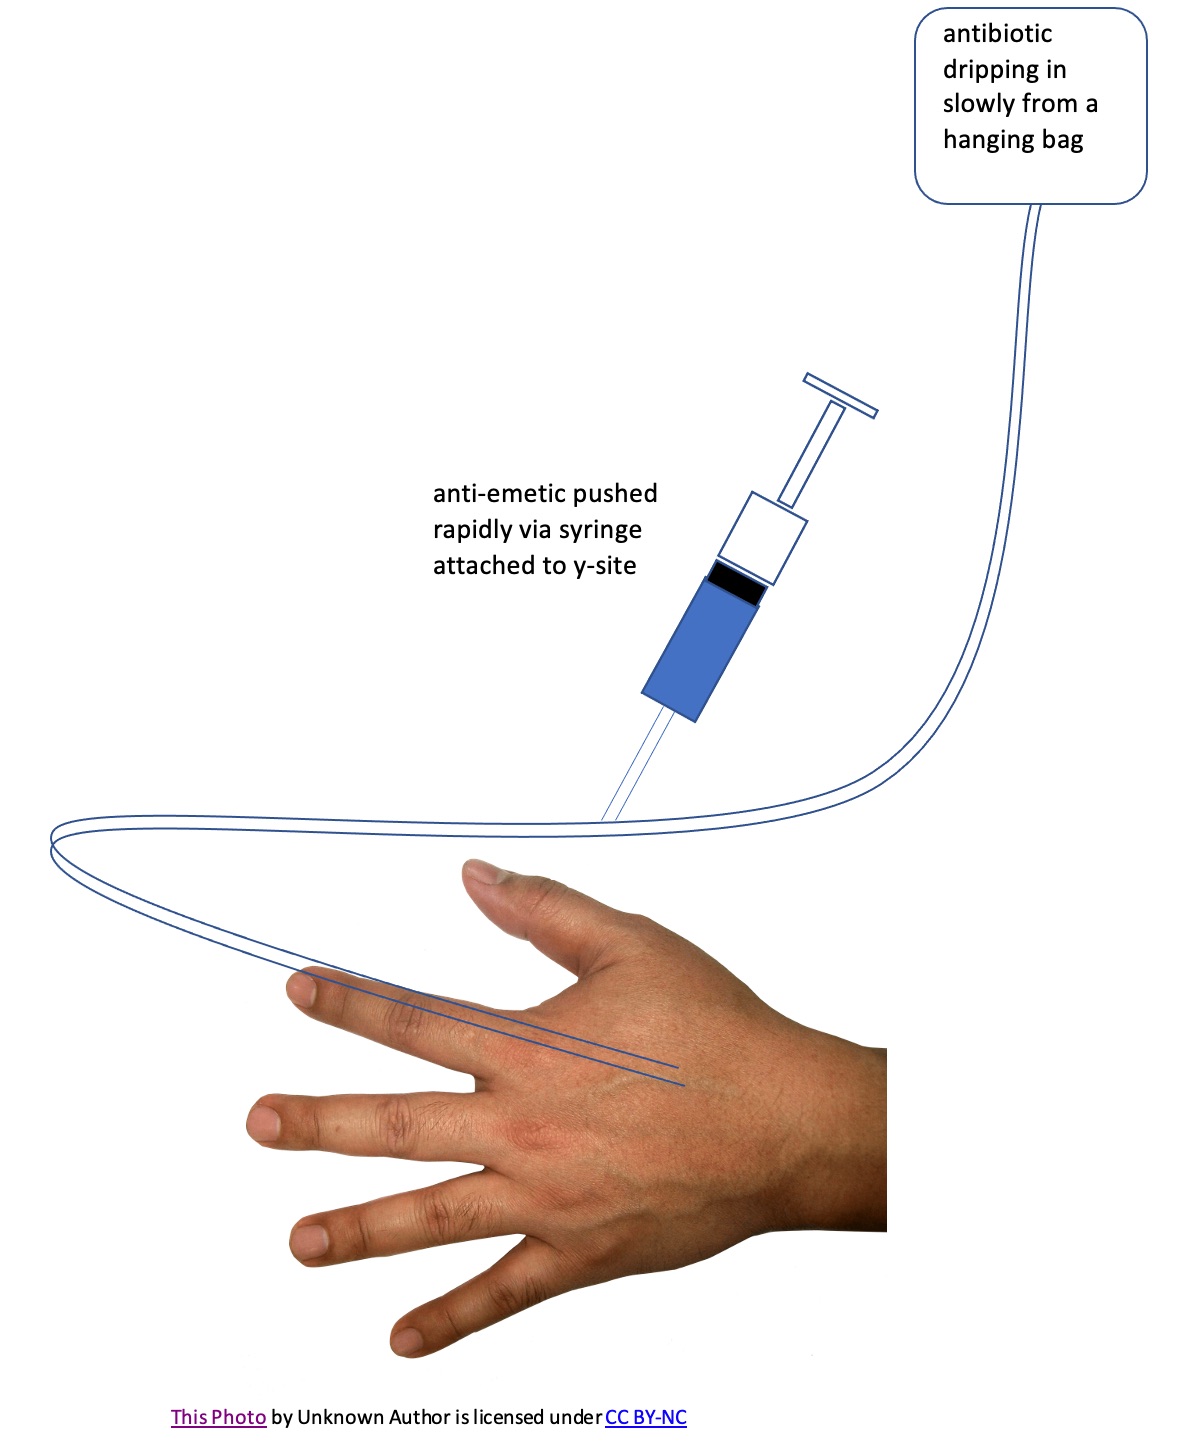 graphic of an antibiotic being delivered IV from a hanging bag while the y-site is being used to deliver an anti-emetic from a syringe.